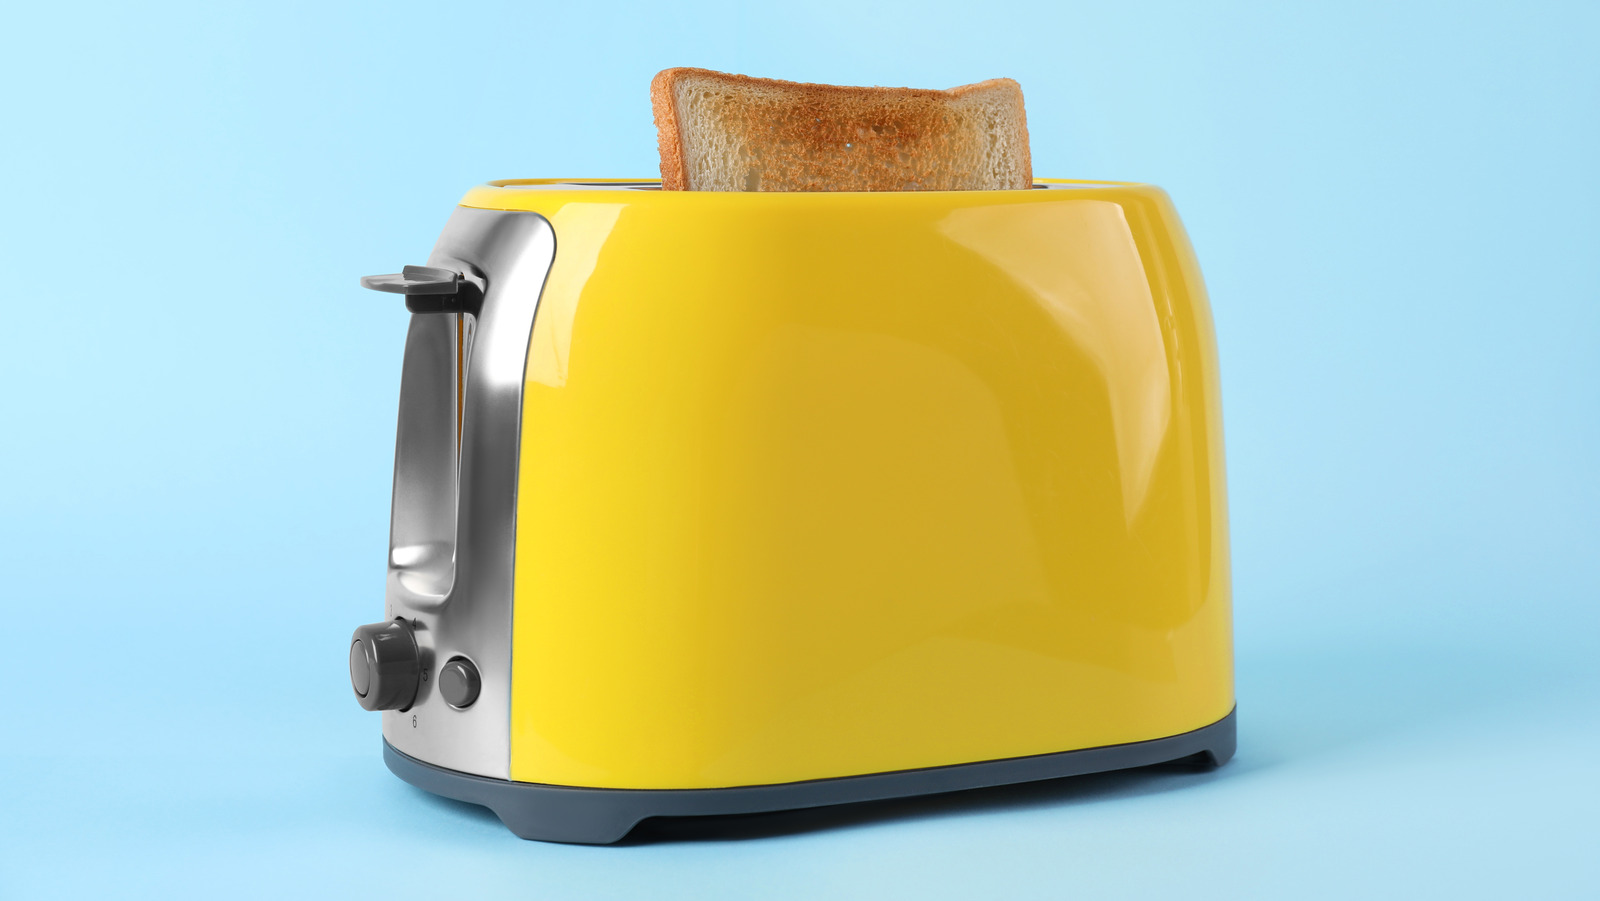 https://www.thedailymeal.com/img/gallery/the-14-best-toasters-to-buy-for-value-in-2023/l-intro-1673378607.jpg